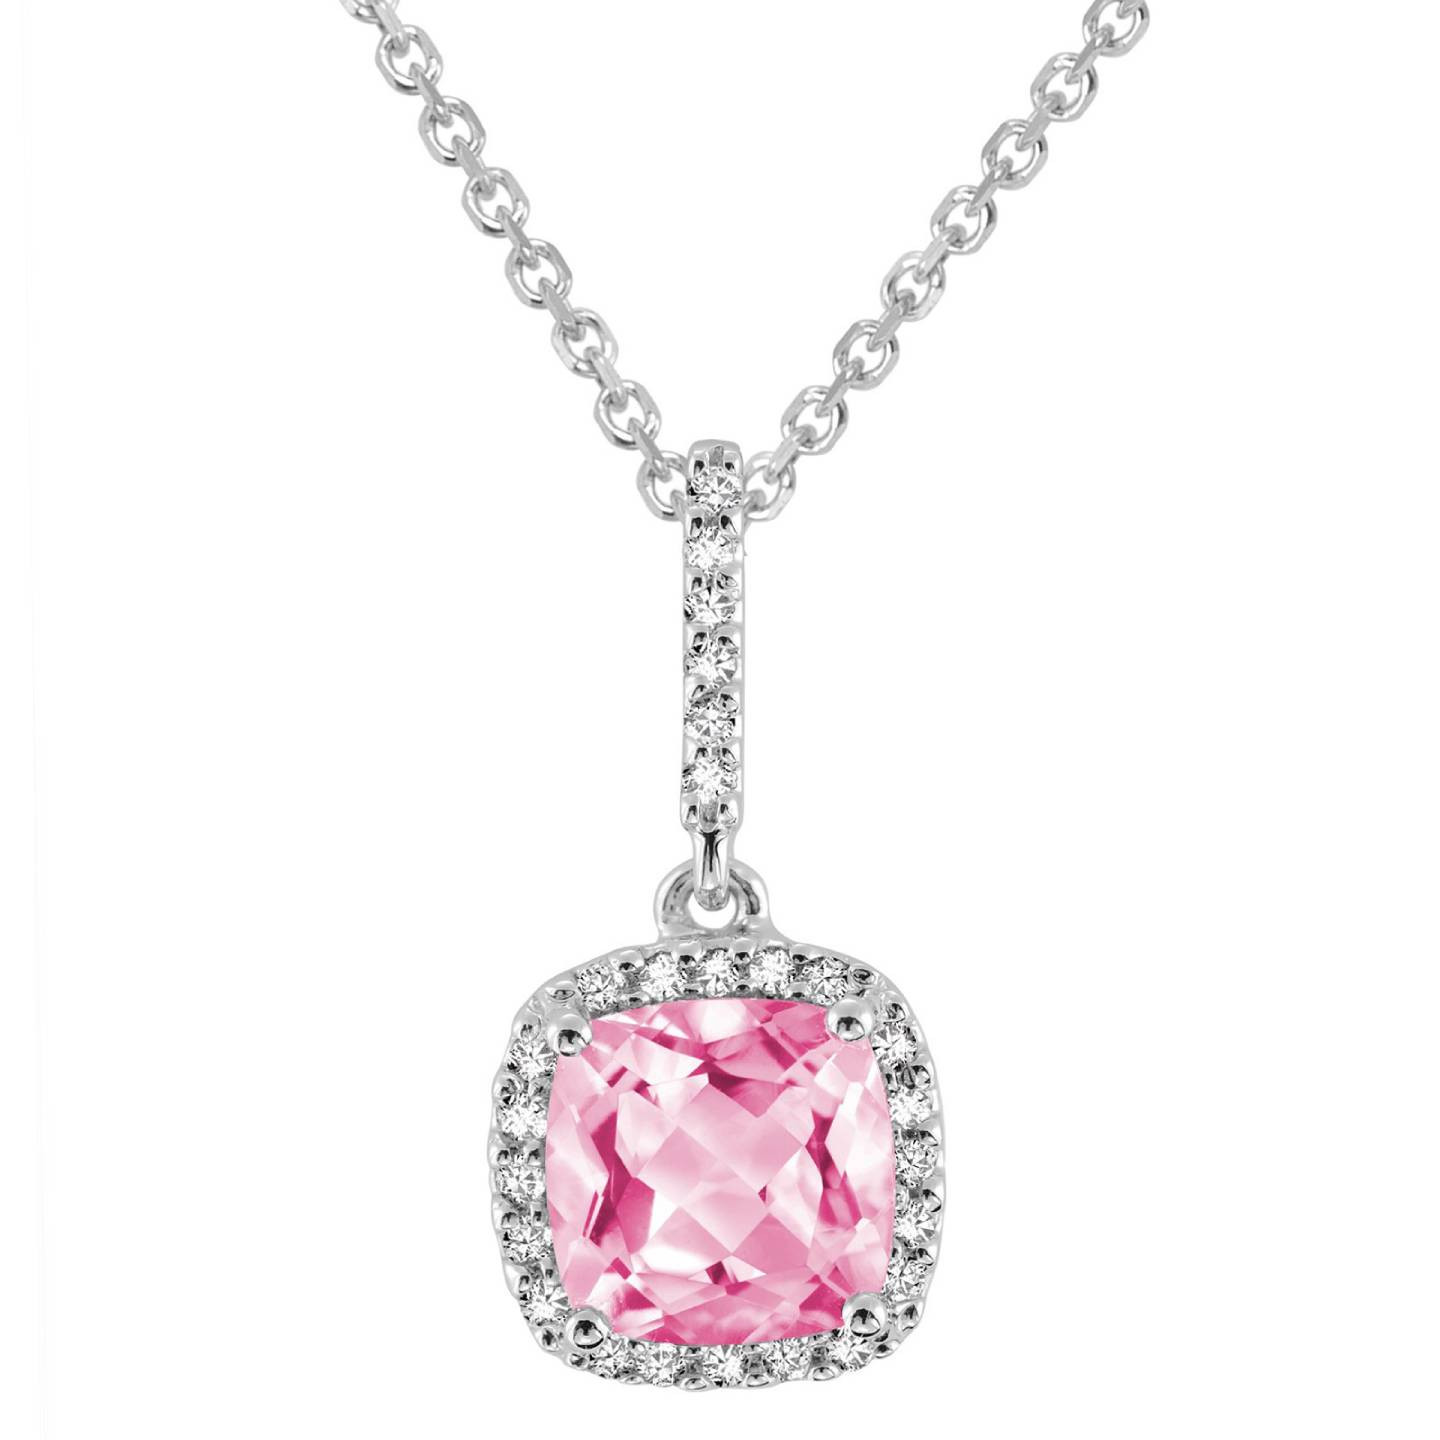 1 3/4 CTW Cushion Pink Topaz Halo Pendant Necklace in 14K White Gold With Chain (MV3150)